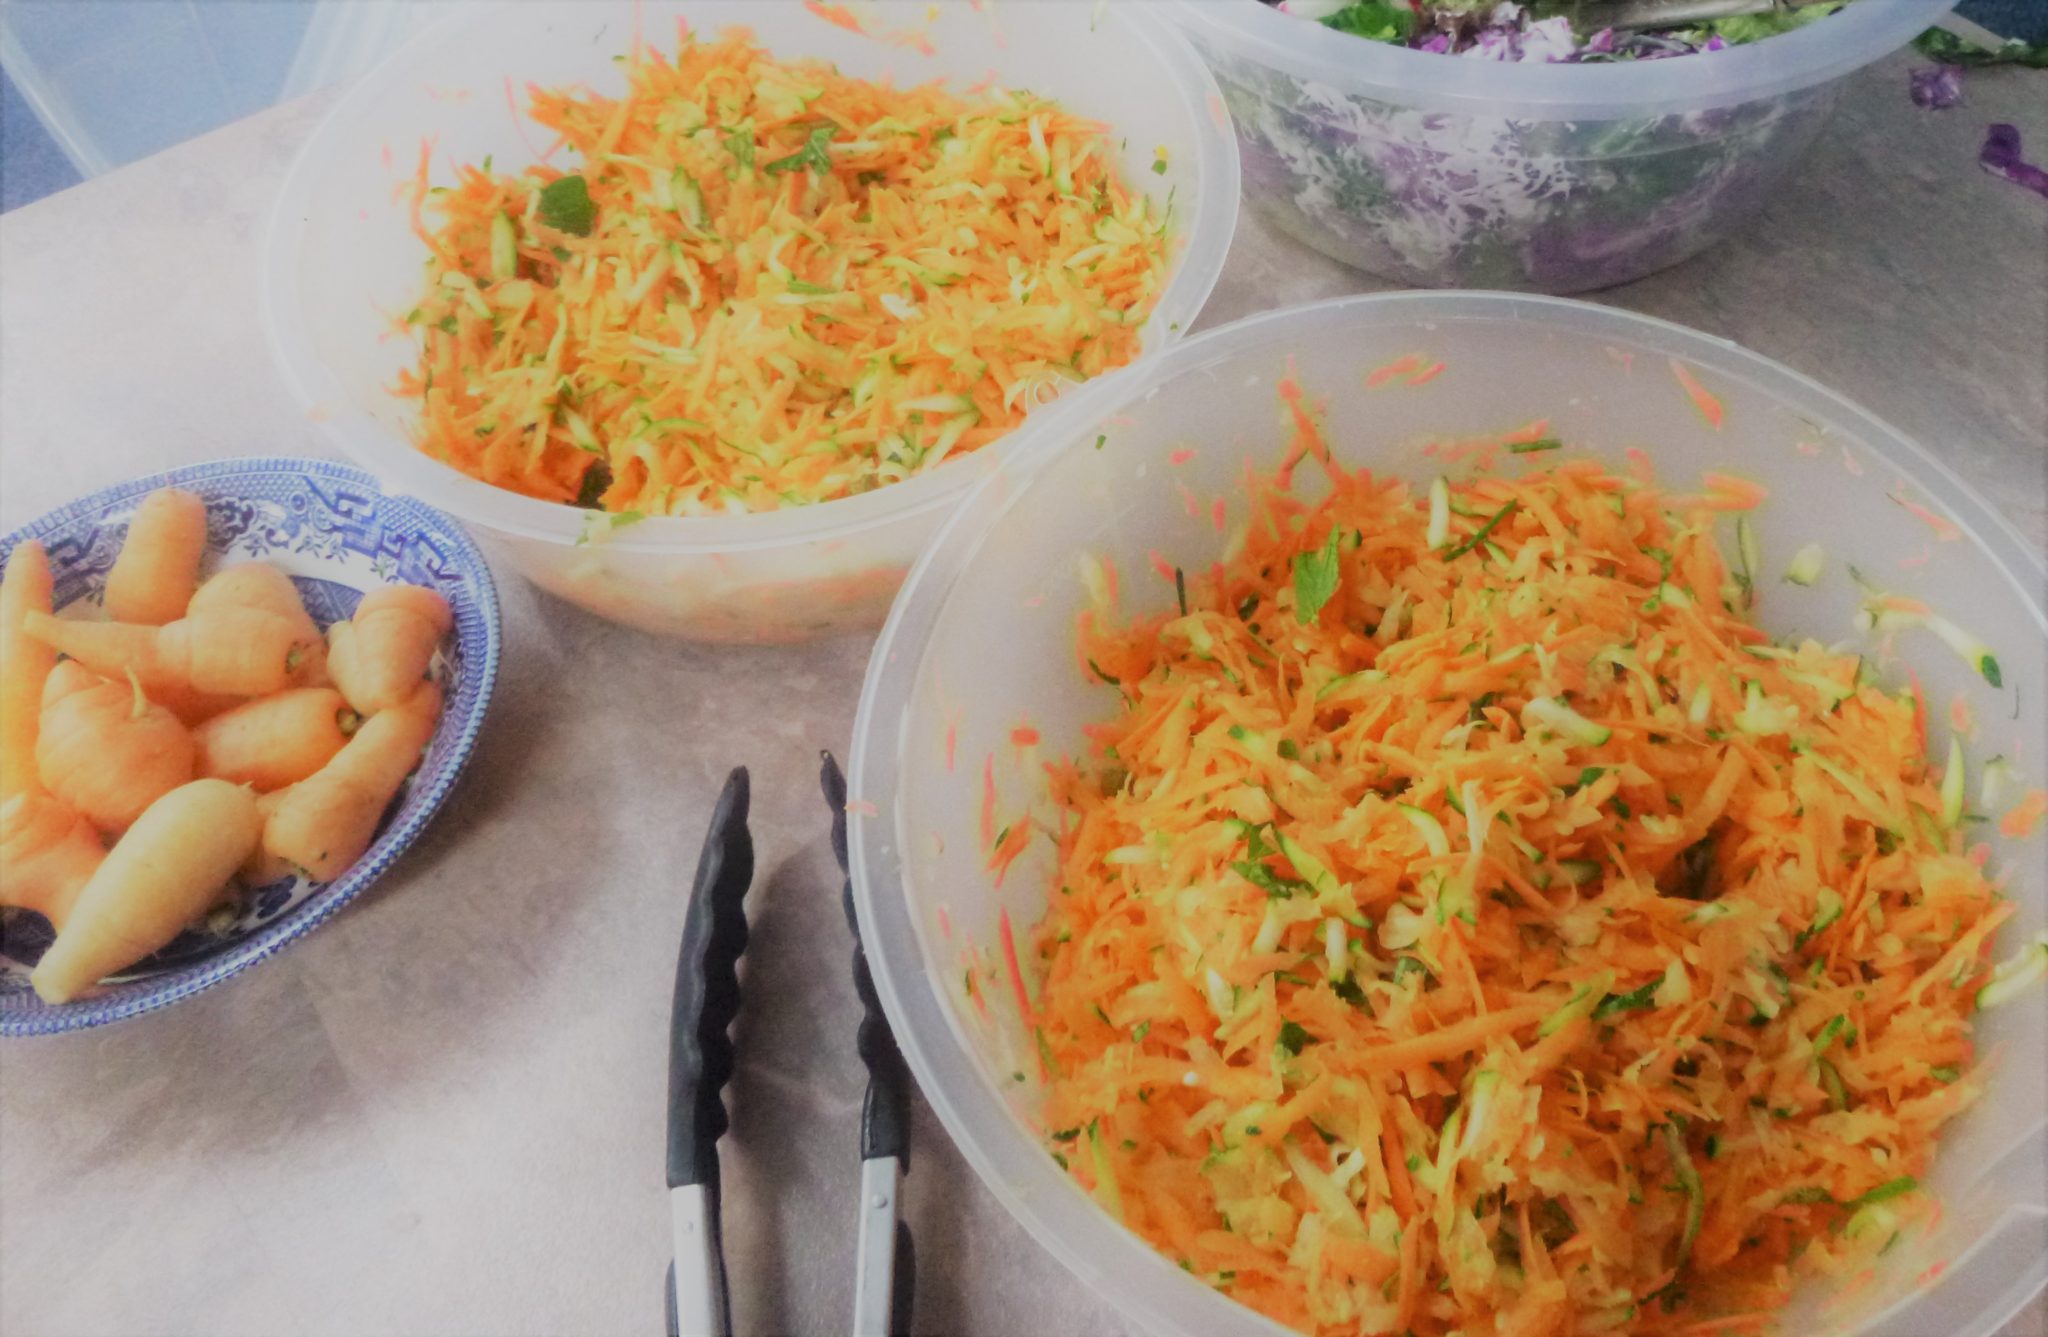 Carrot and Courgette Salad